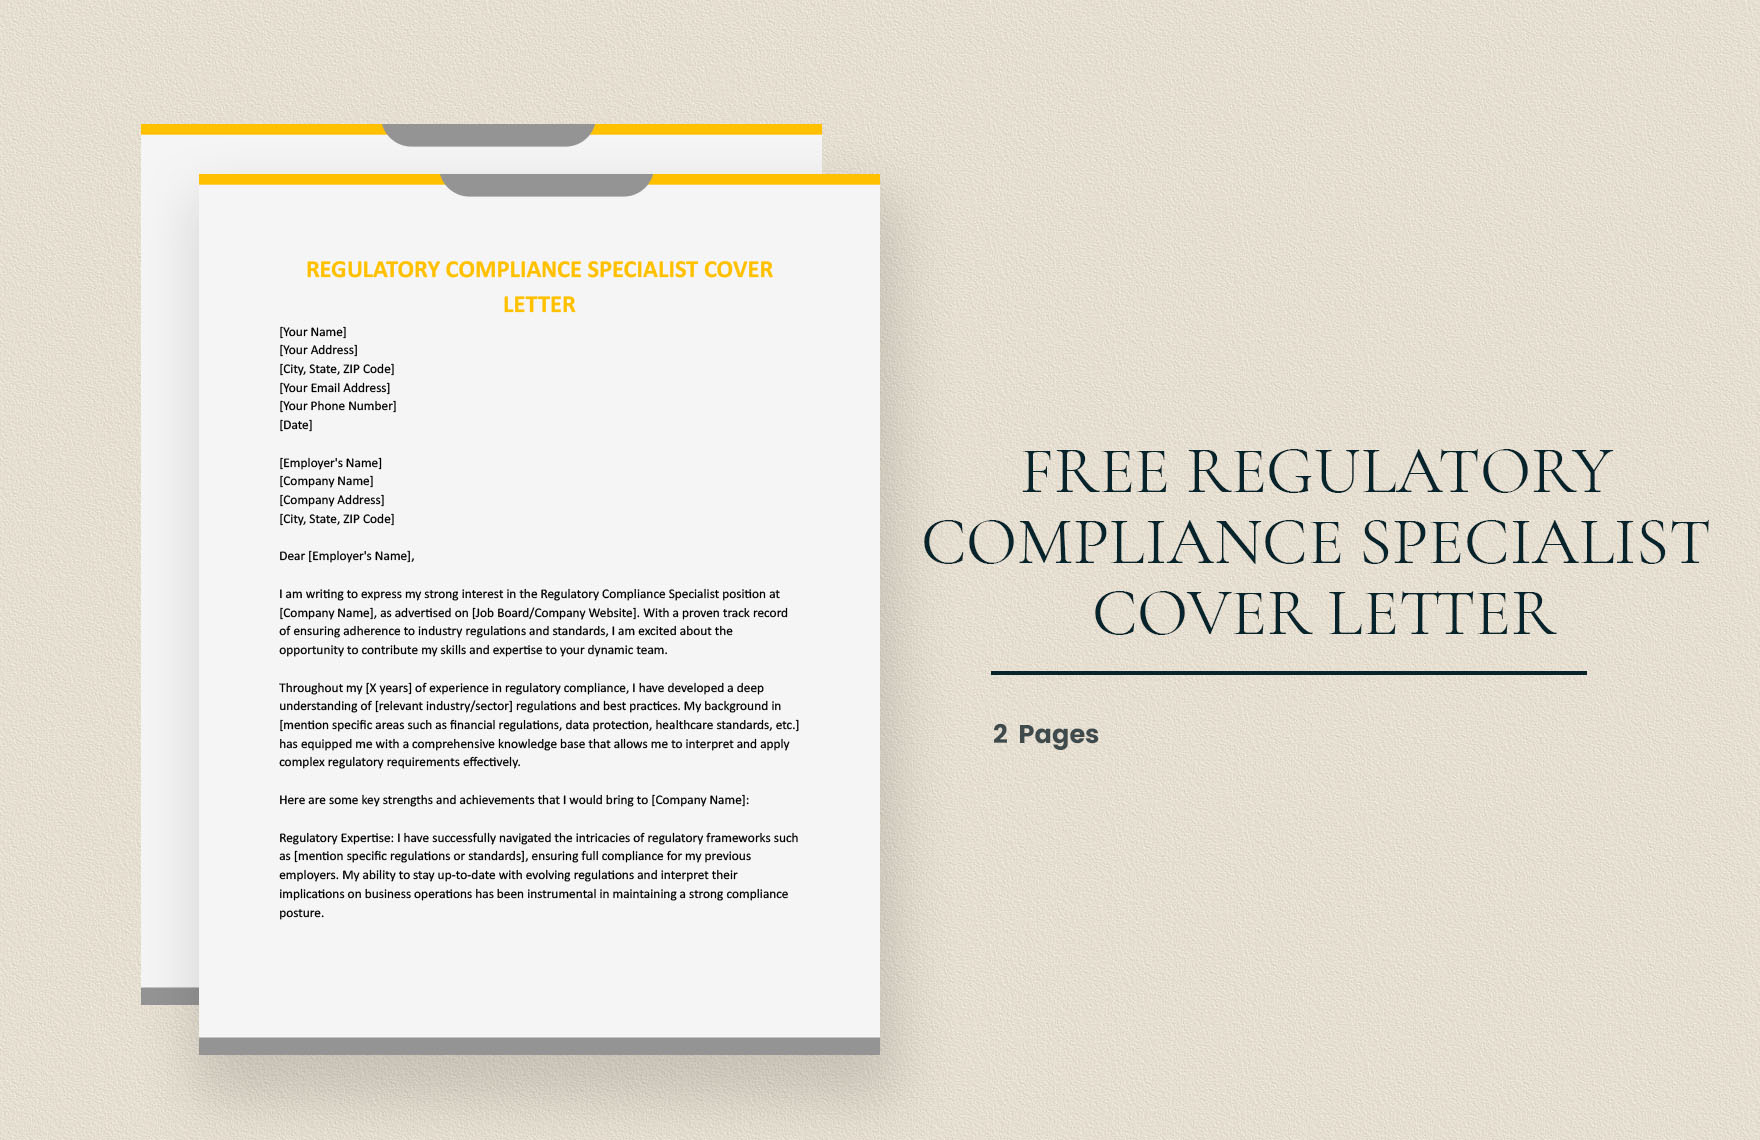 Regulatory Compliance Specialist Cover Letter in Word, Google Docs